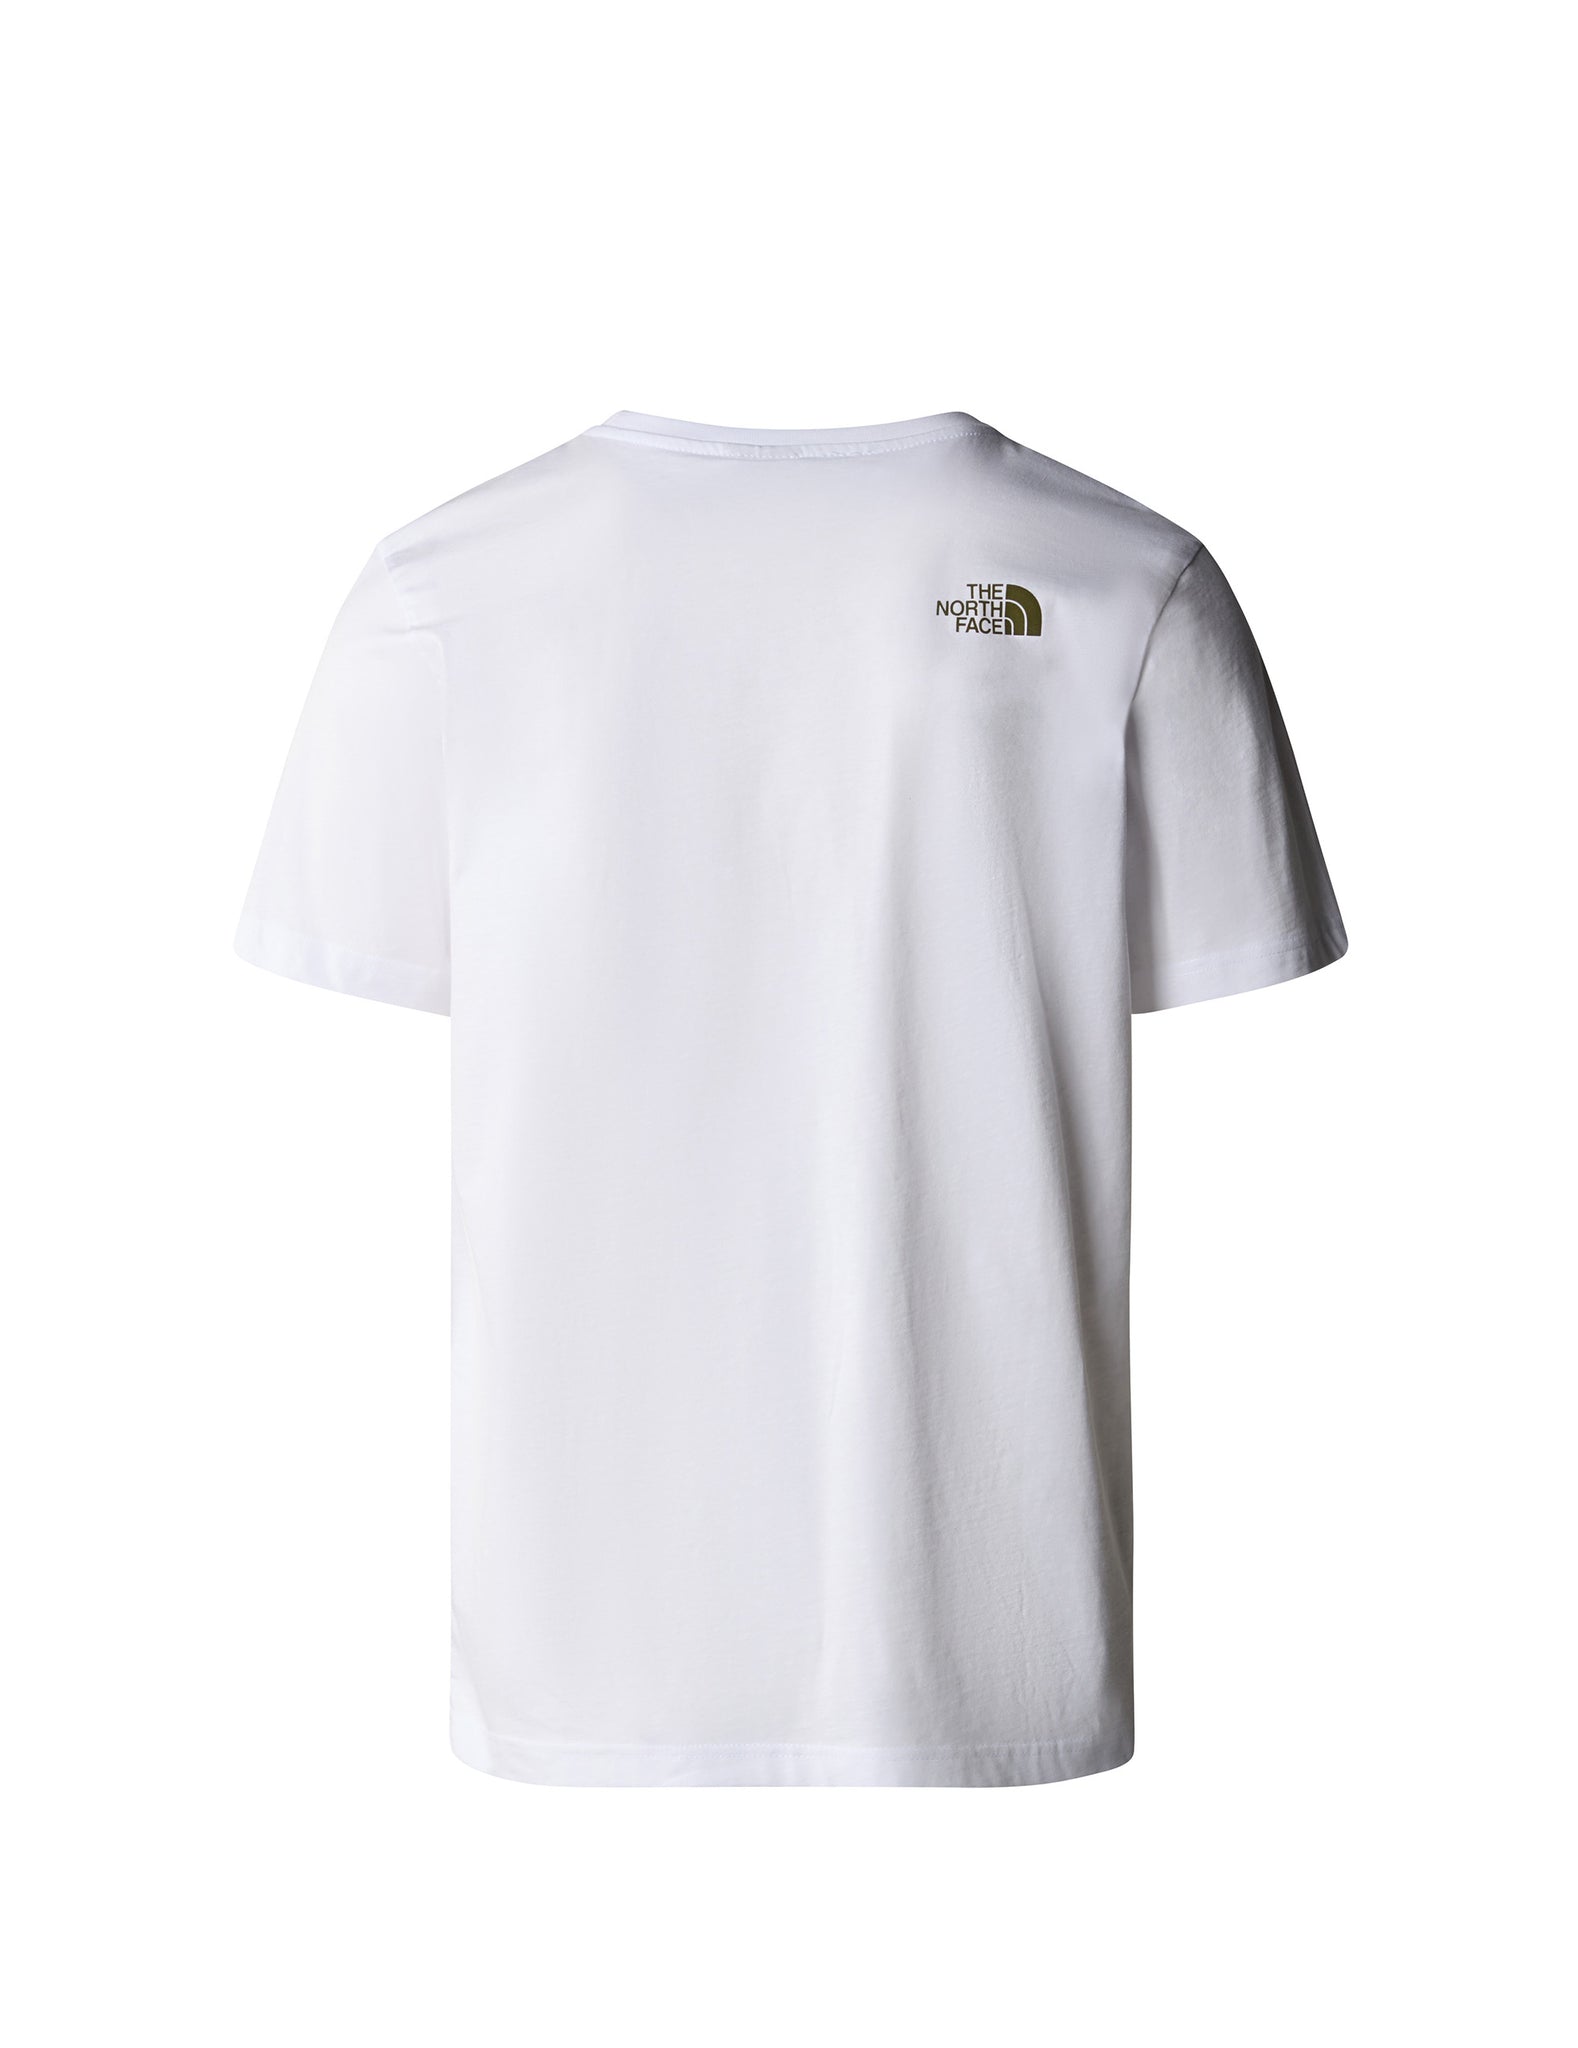 The North Face Men'S S/S Rust 2 Tee White